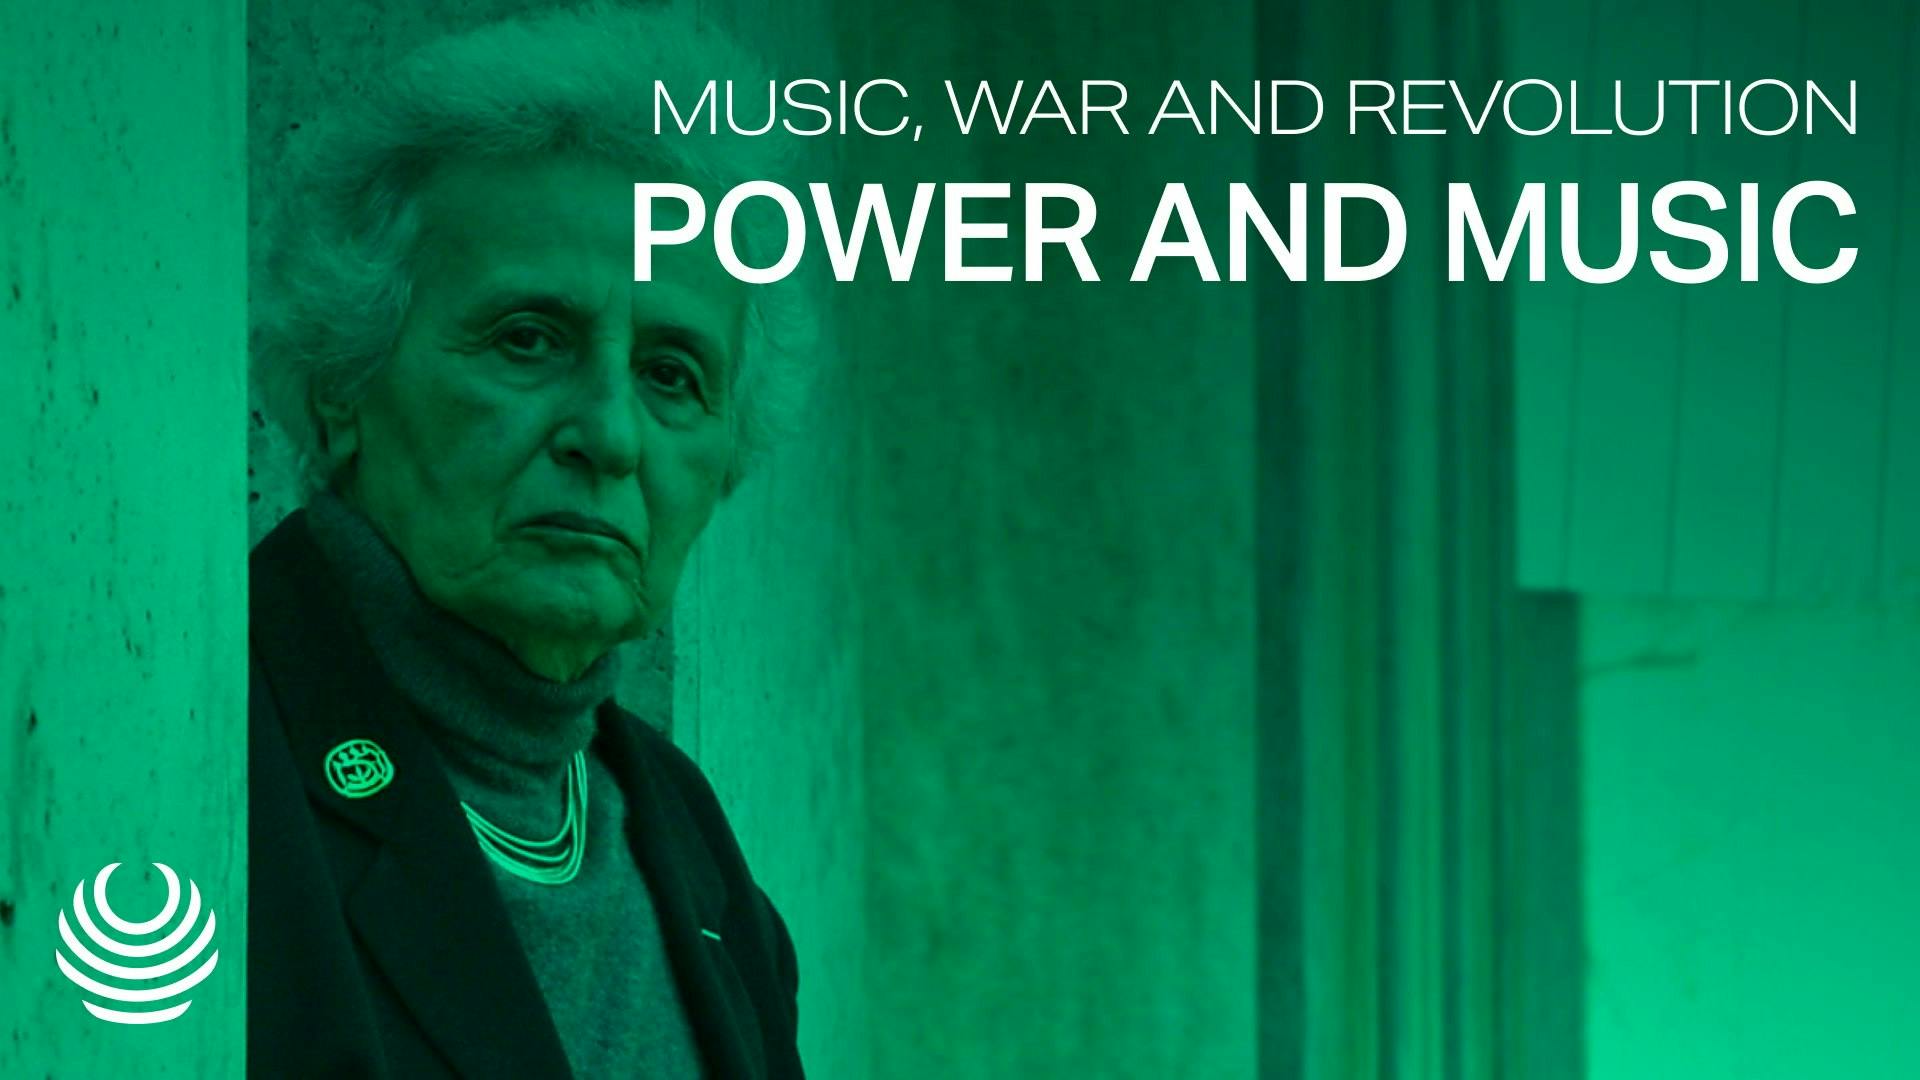 Music, War and Revolution - Power and Music